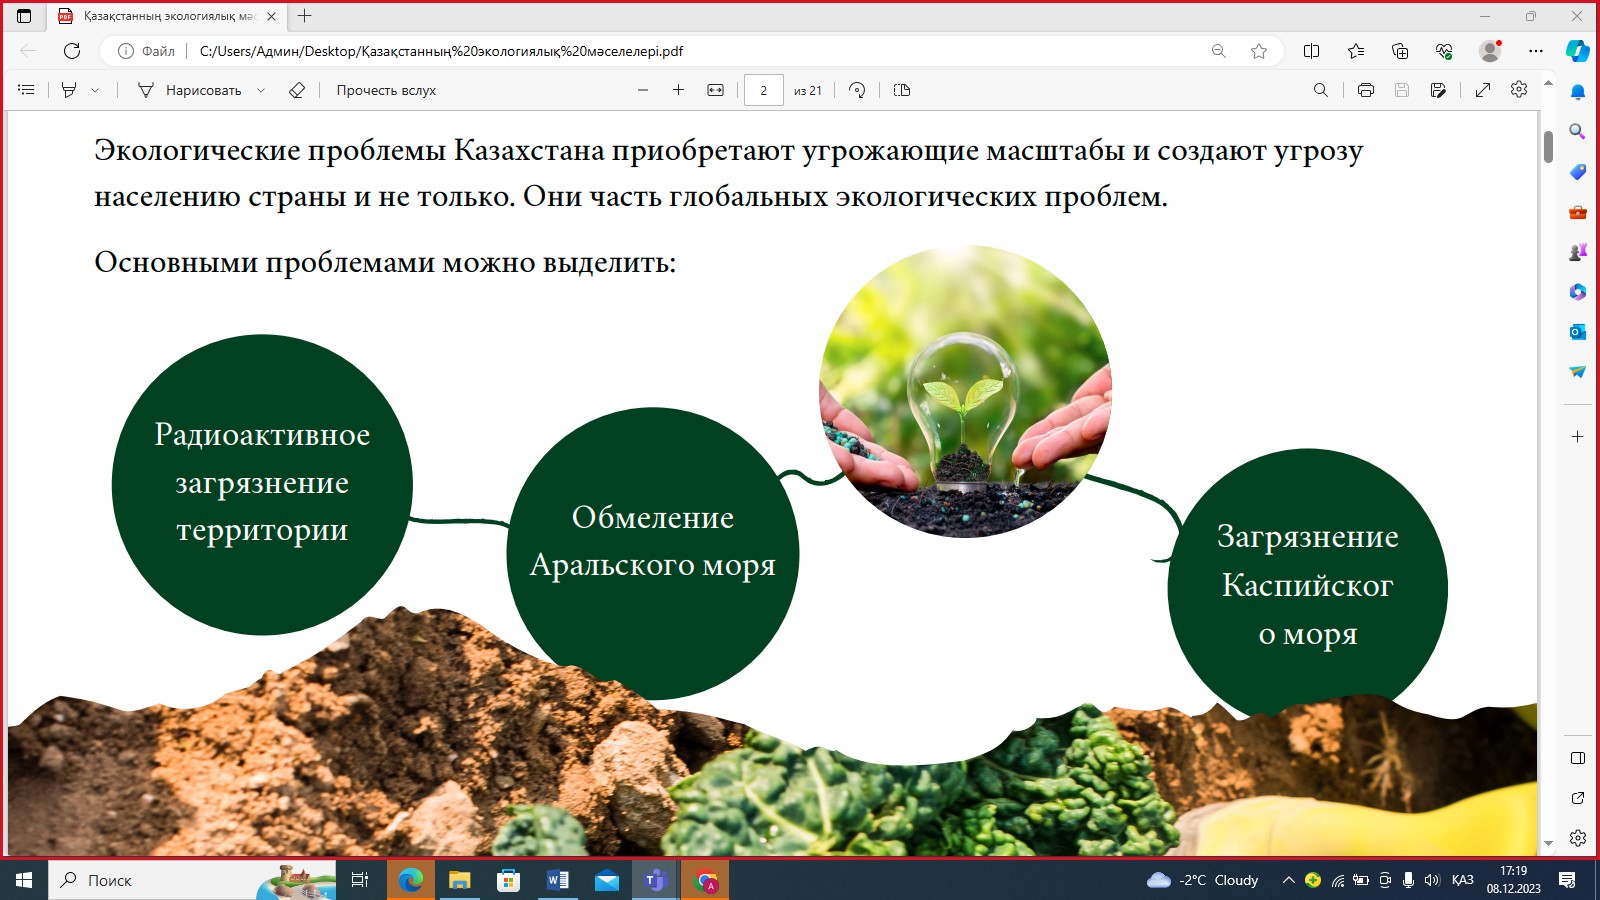 Event  on "Ecological problems in Kazakhstan"